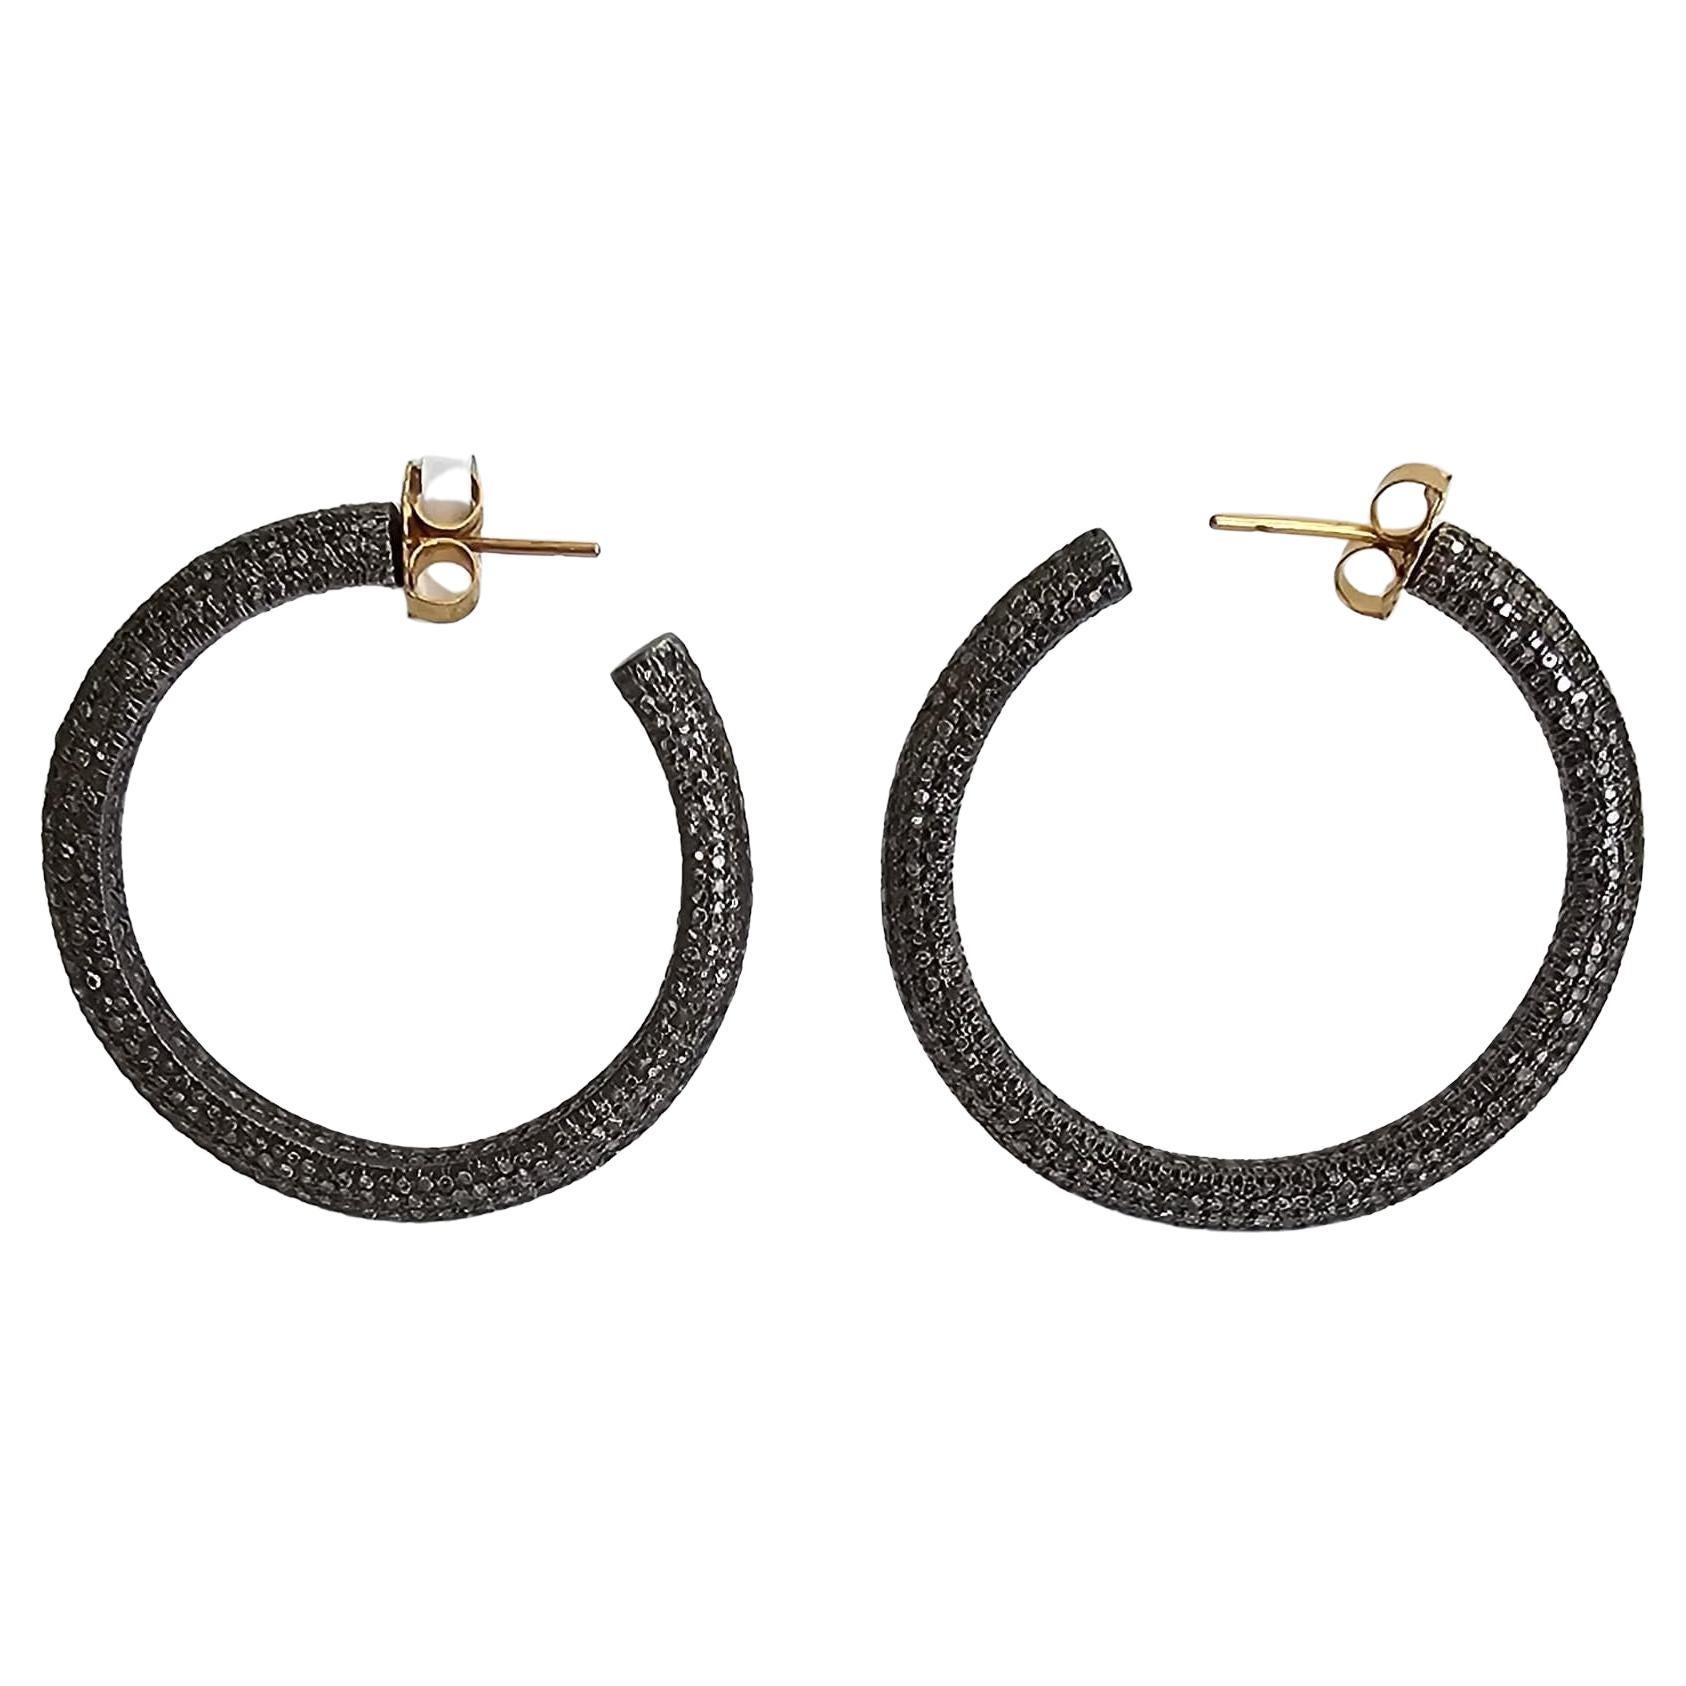 Pave Diamonds Hoop Earrings Made In 18k Yellow Gold & Silver